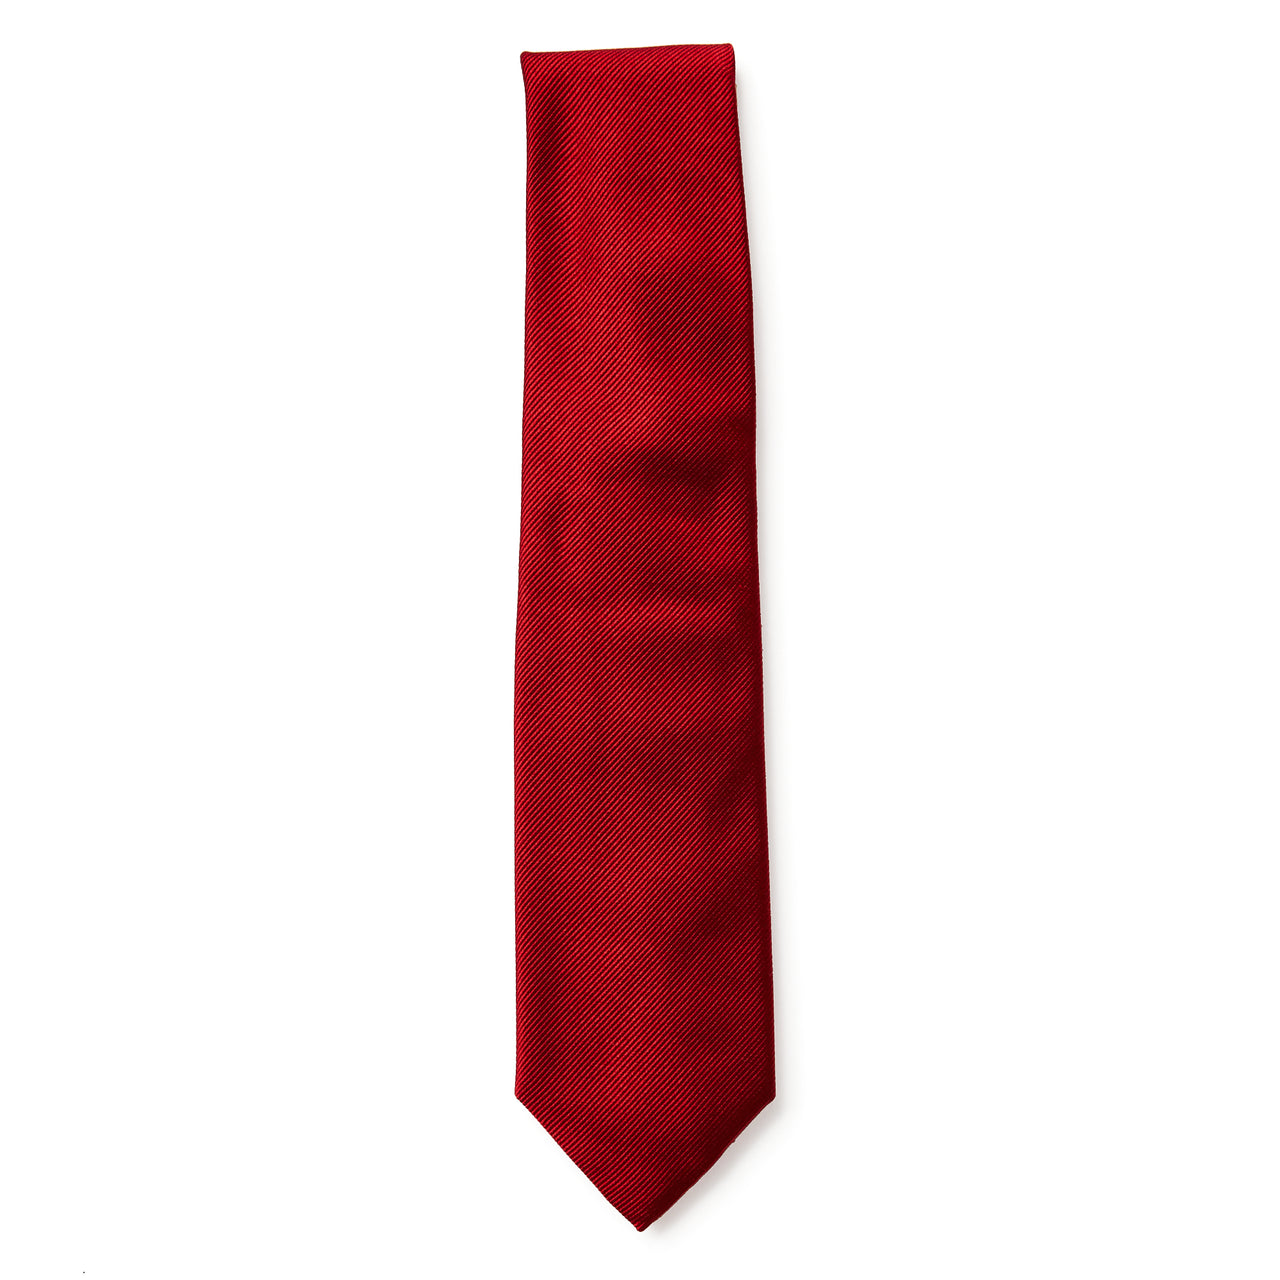 HENRY SARTORIAL 3 Fold Zeus Collection Tie RED